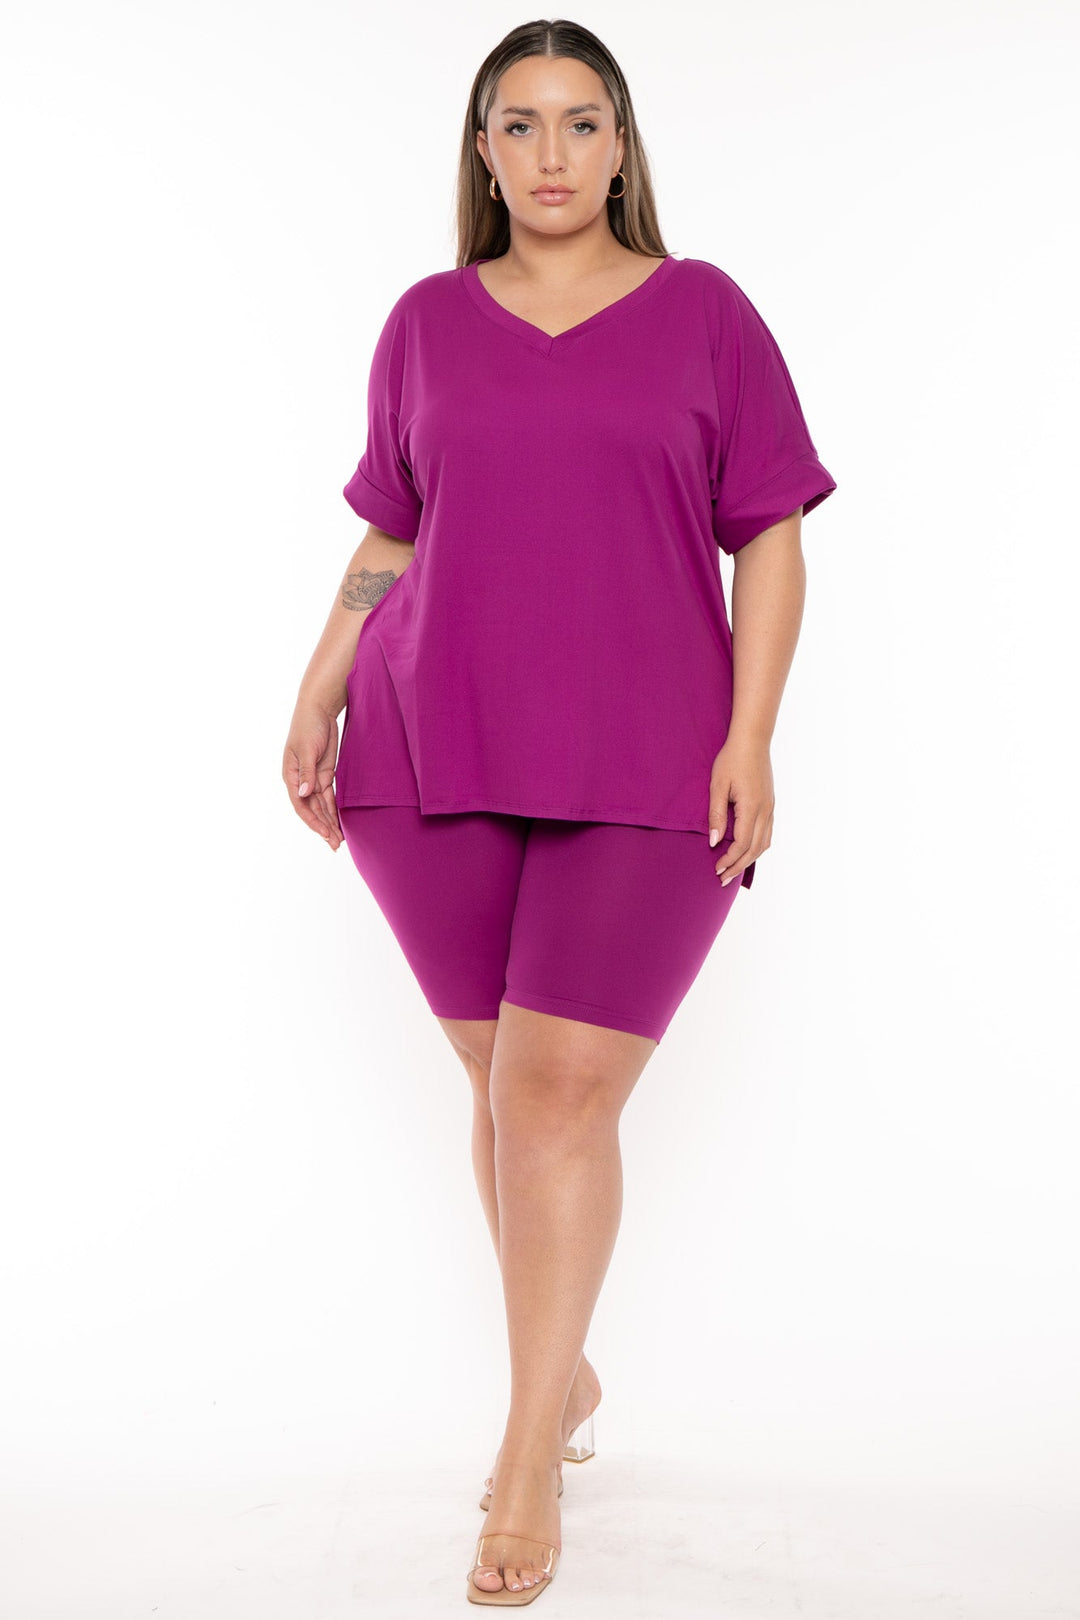 Zenana Jumpsuits and Rompers Plus Size Lexia top and Short Set-Magenta